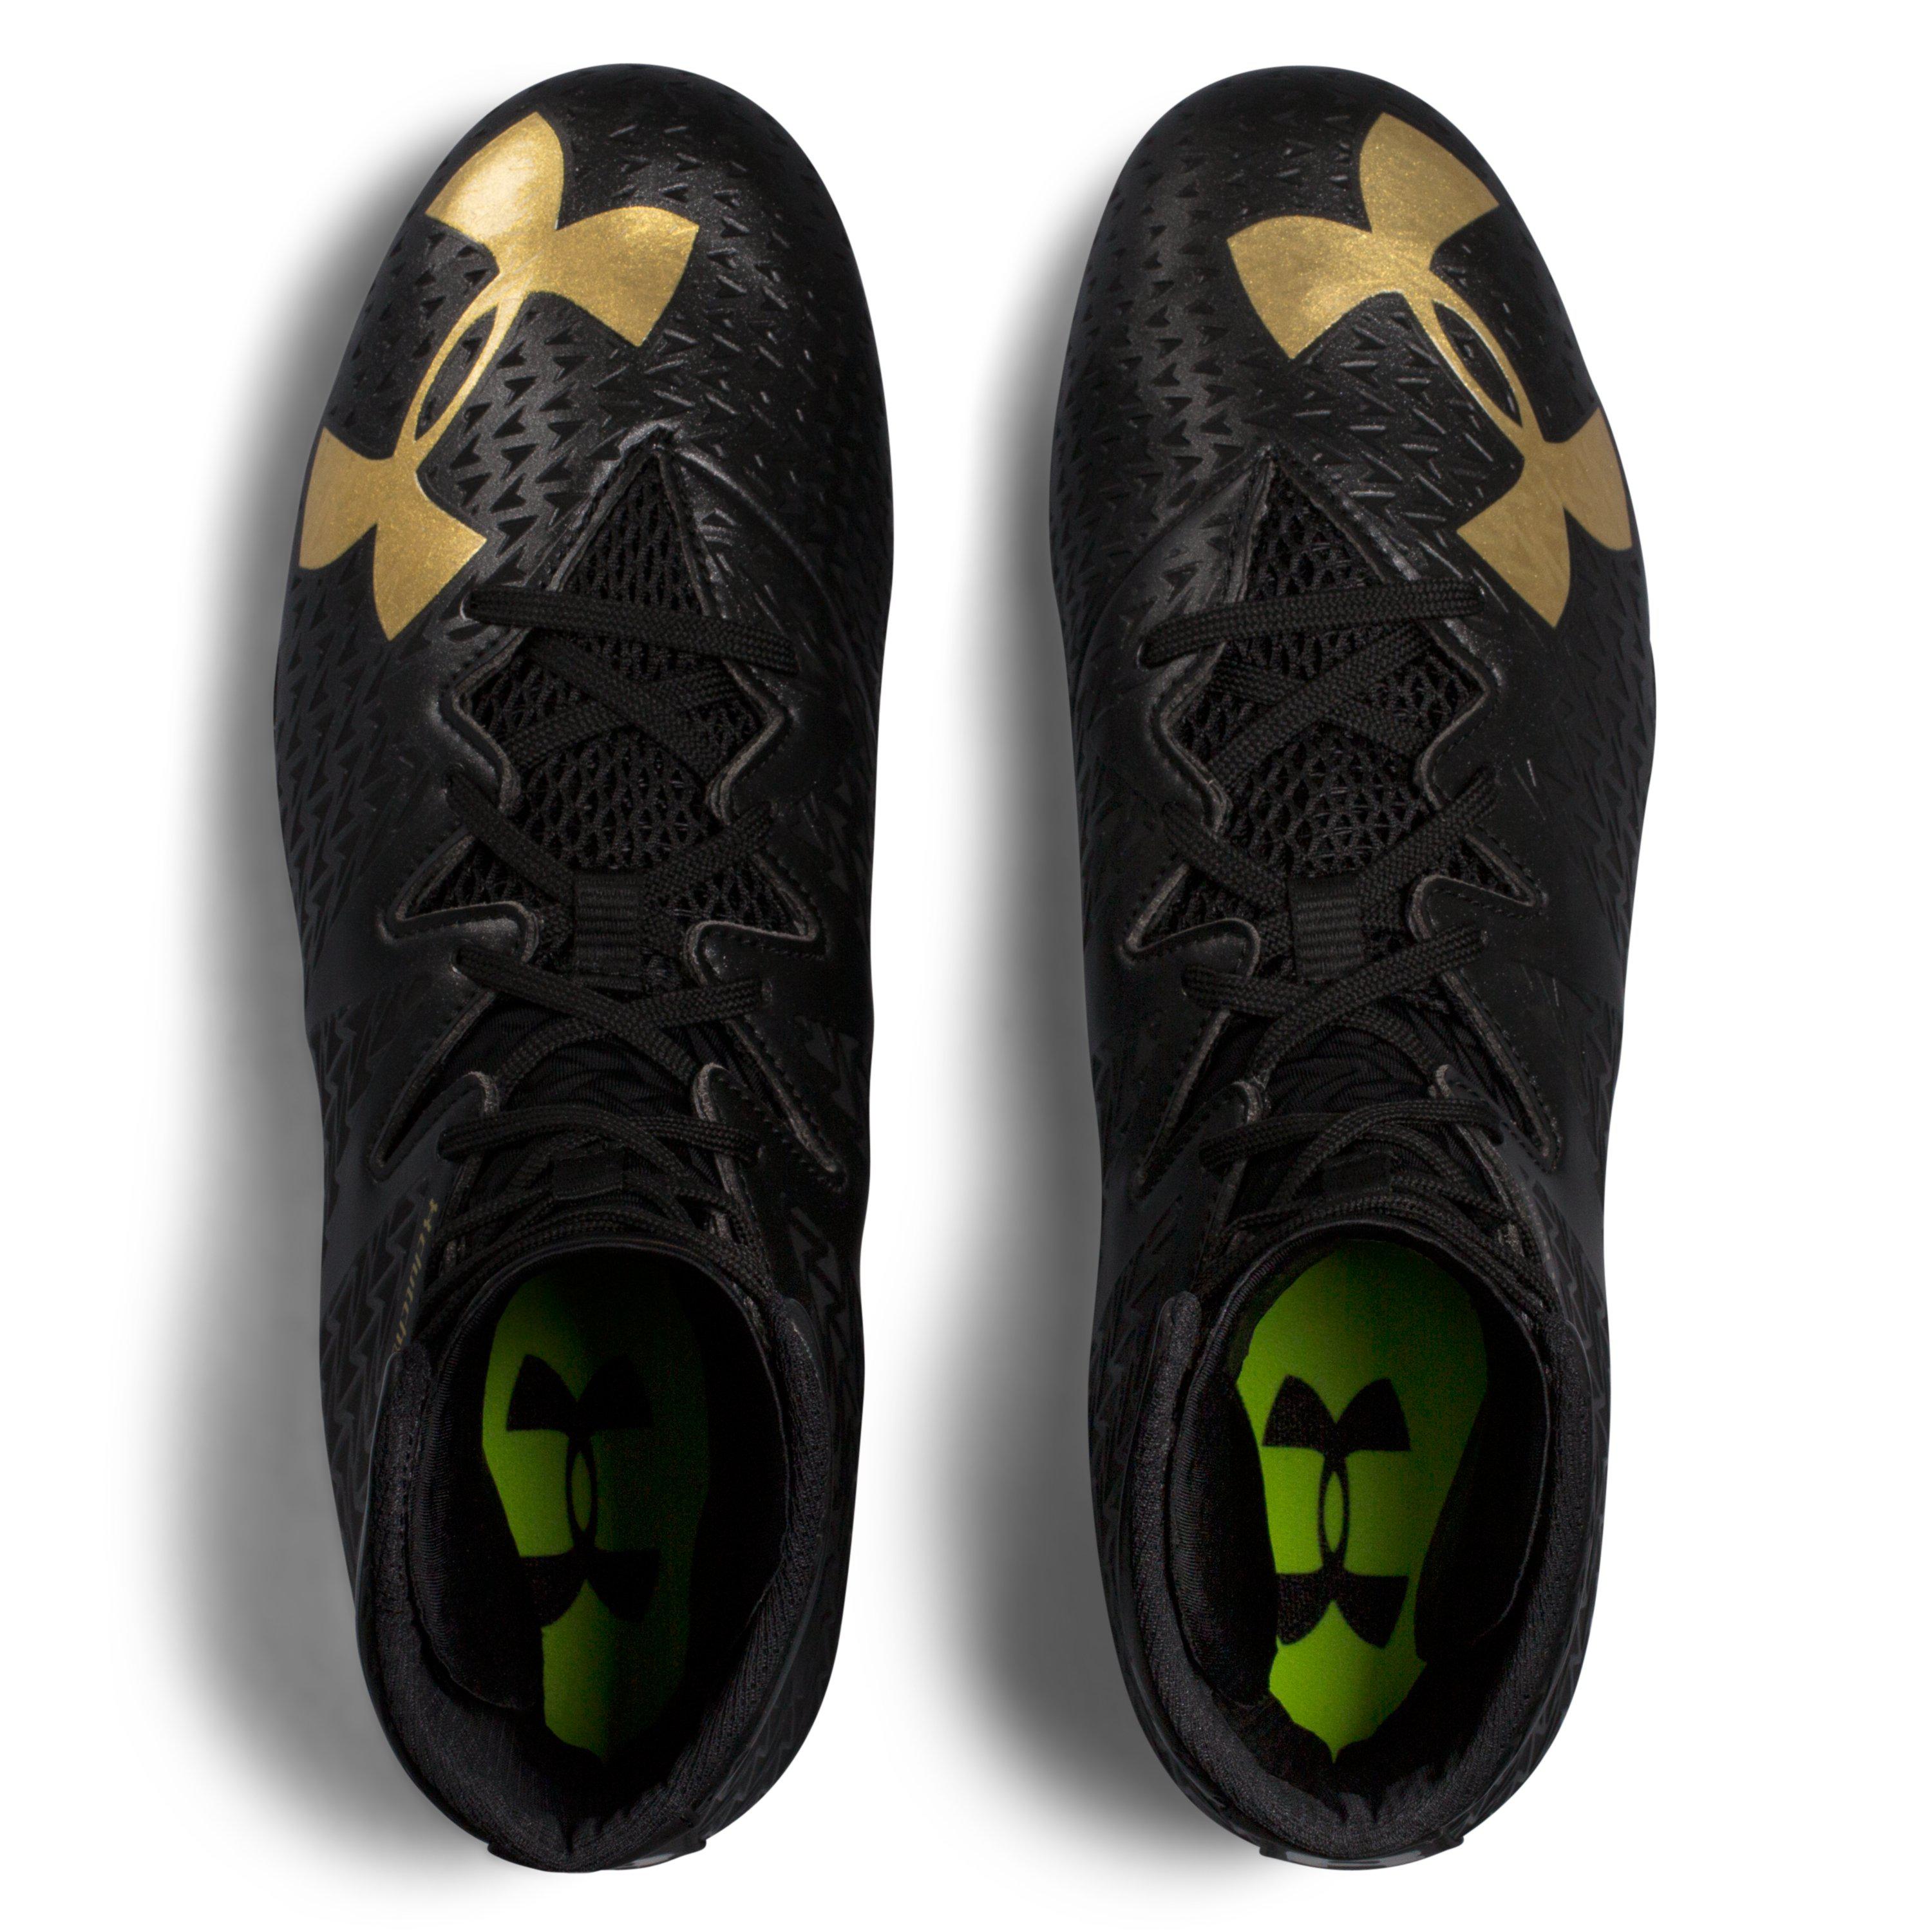 under armour highlight hybrid sg rugby boots